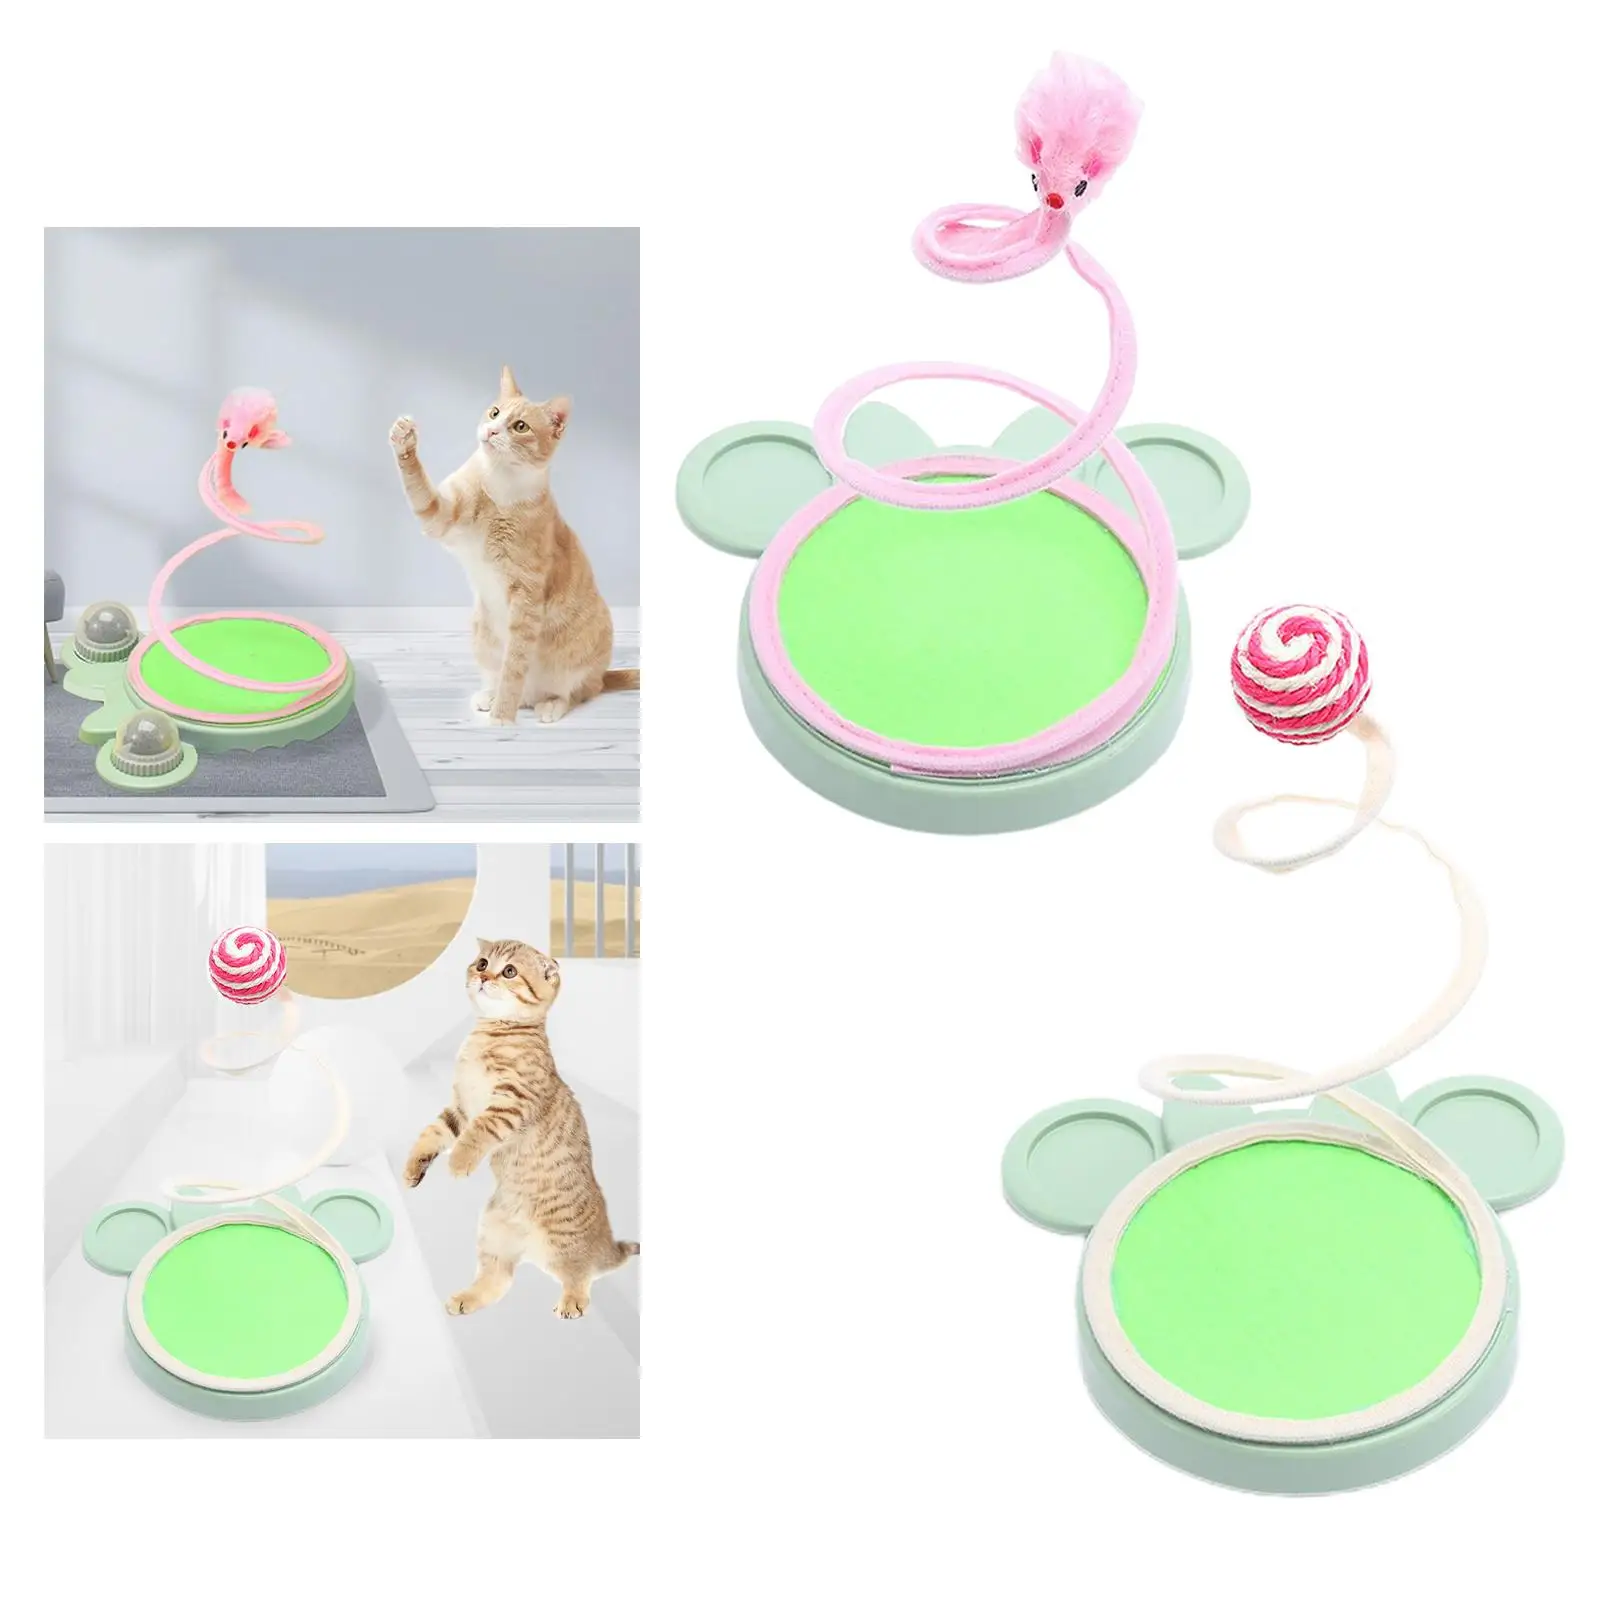 Cat Spring Toy, Scratch Plush Toy Interactive Pet for Indoor Kitten Kitty